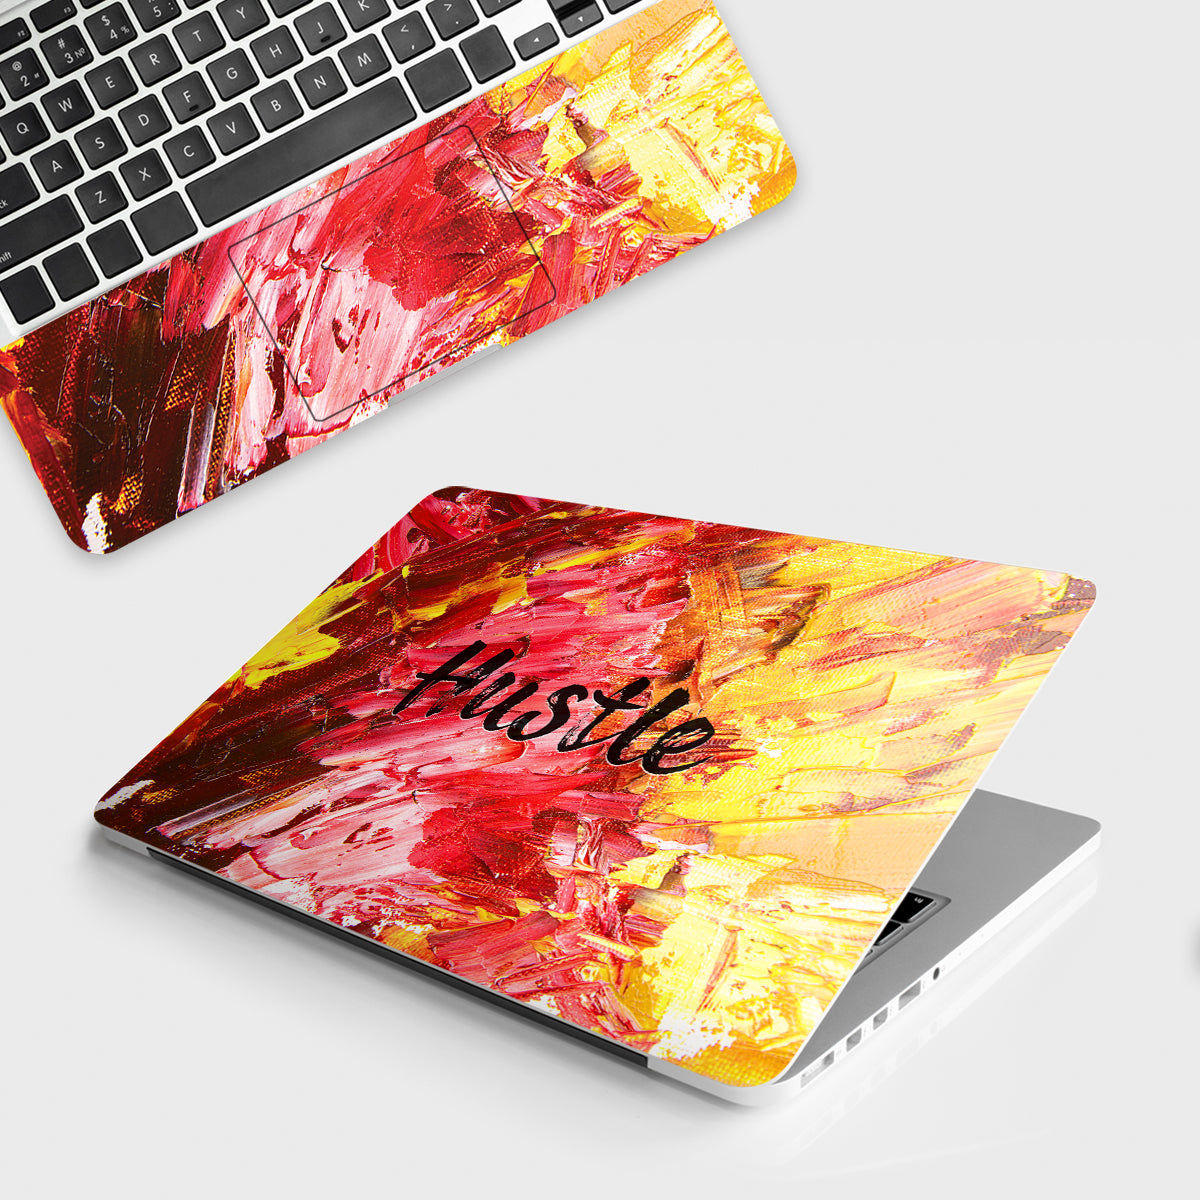 Fomo Store Laptop Skins Abstract Hustle